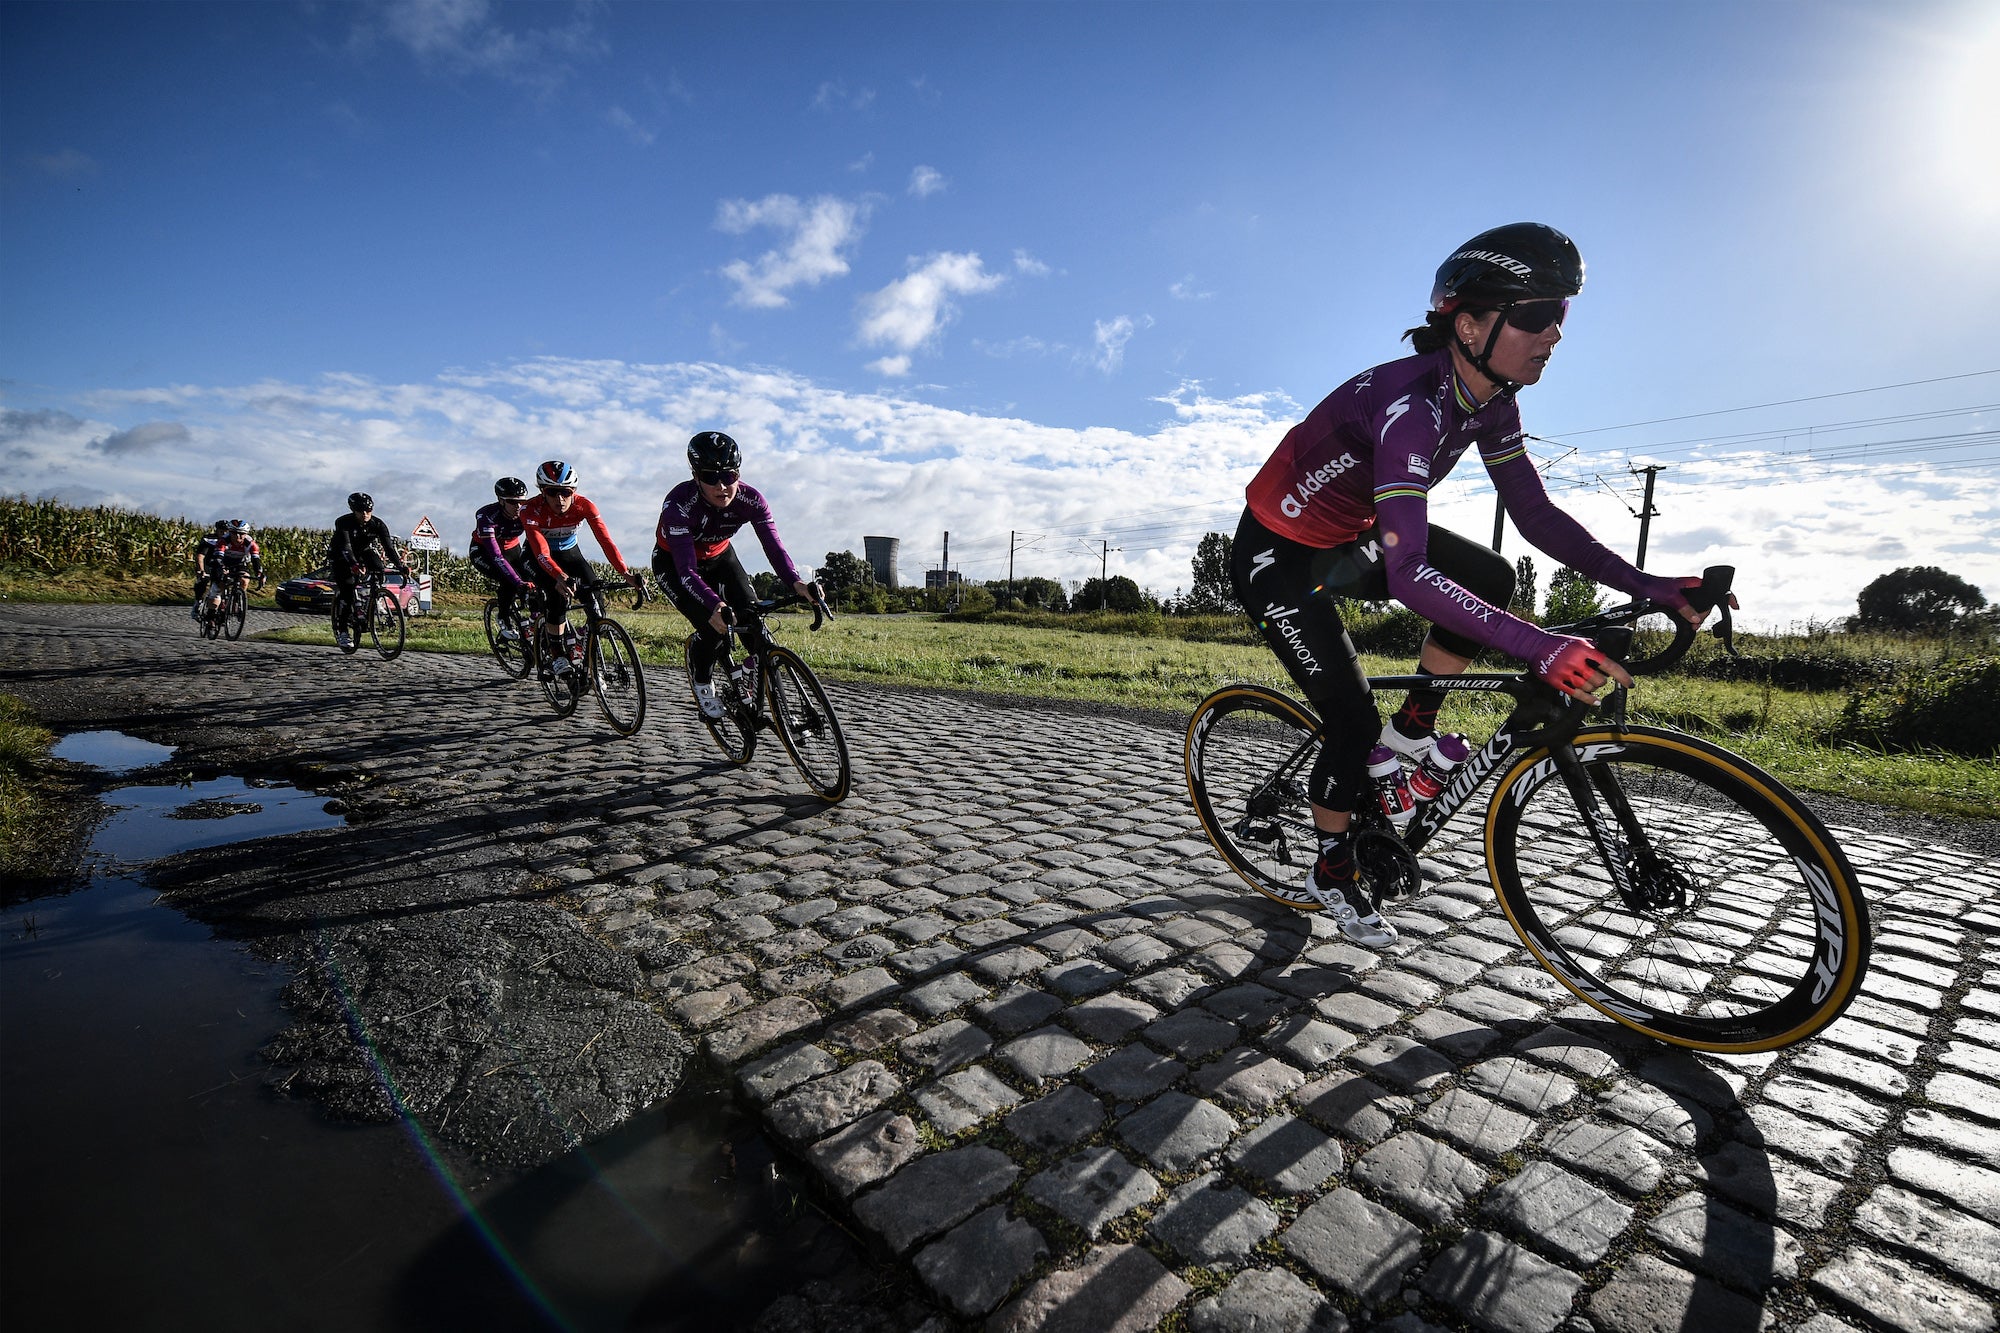 Updated list of all cobblestone sectors for Paris-Roubaix weekend